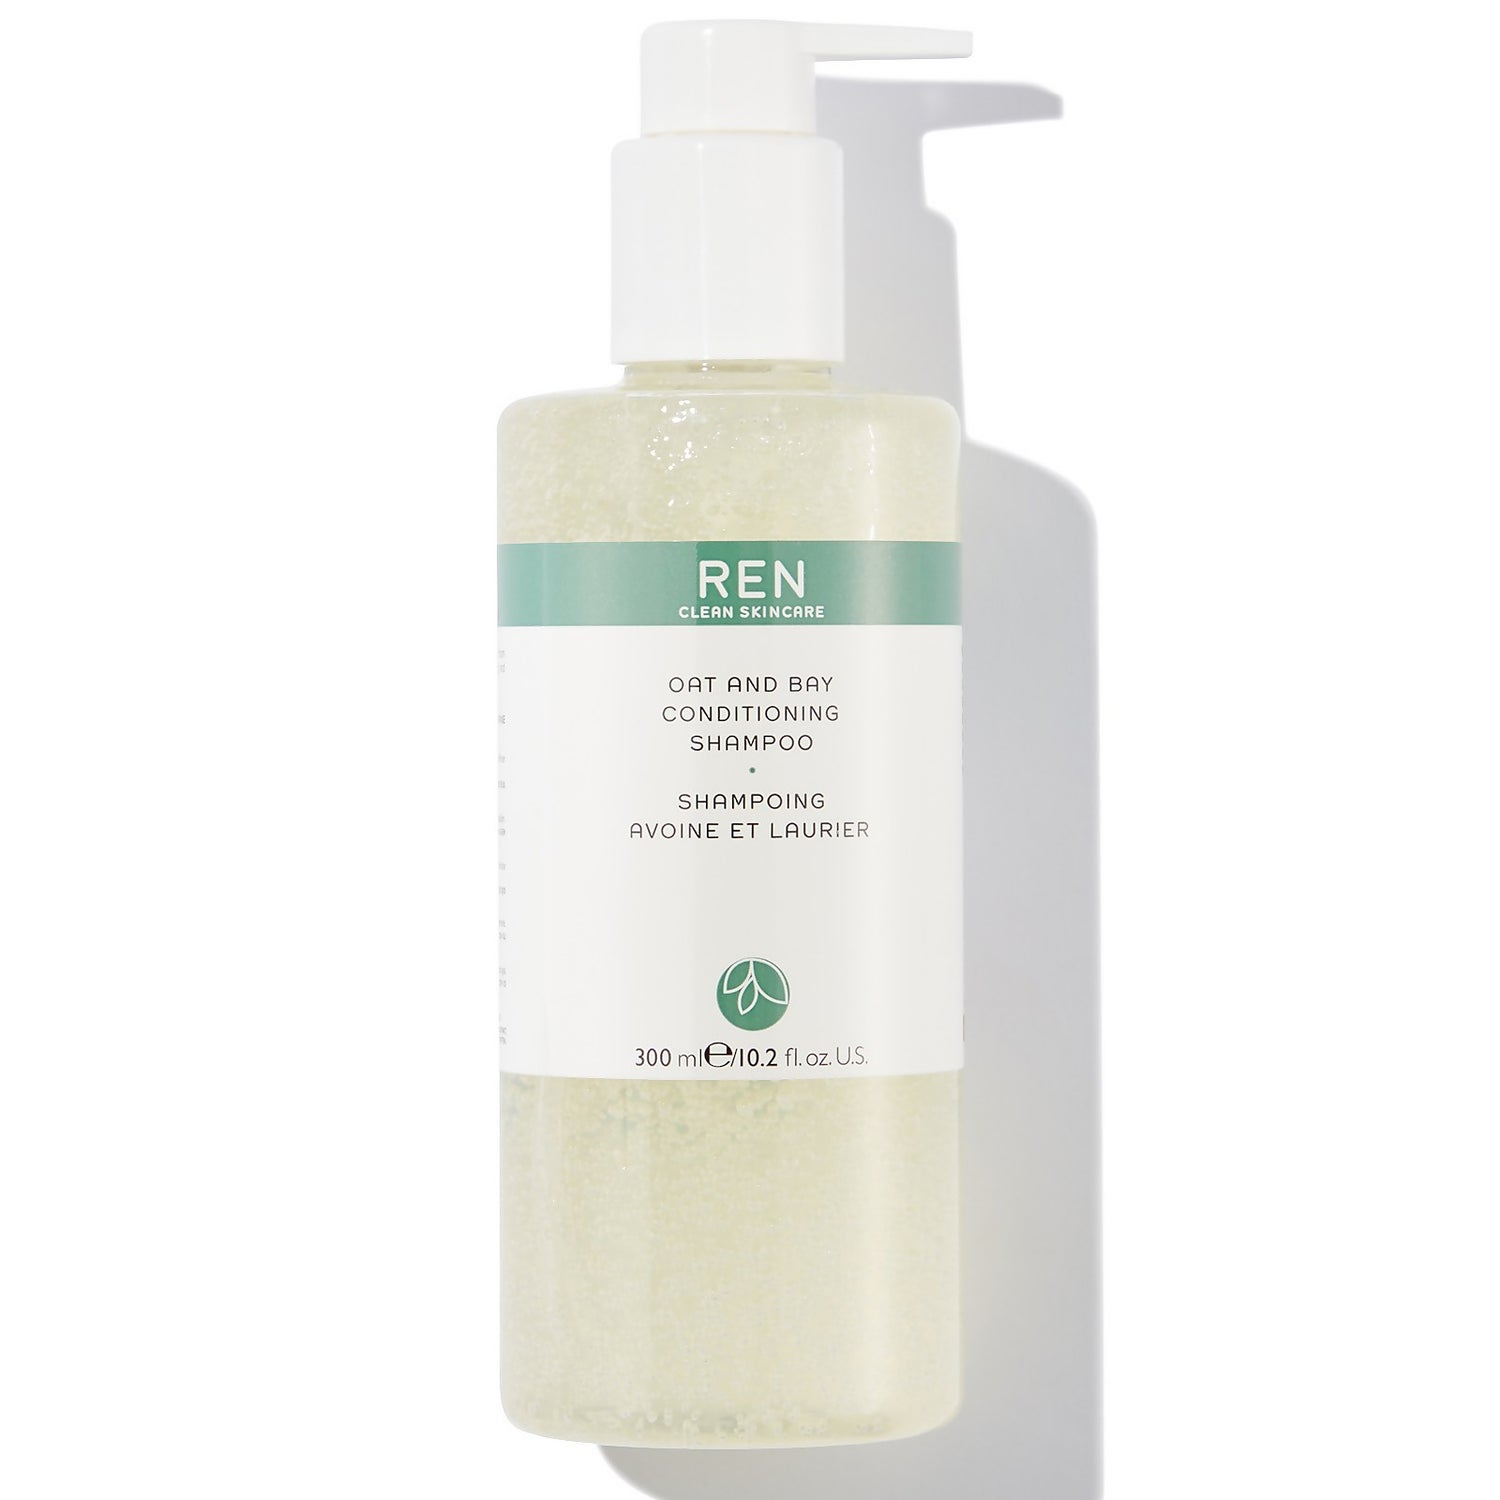 REN Oat and Bay Conditioning Shampoo 300ml